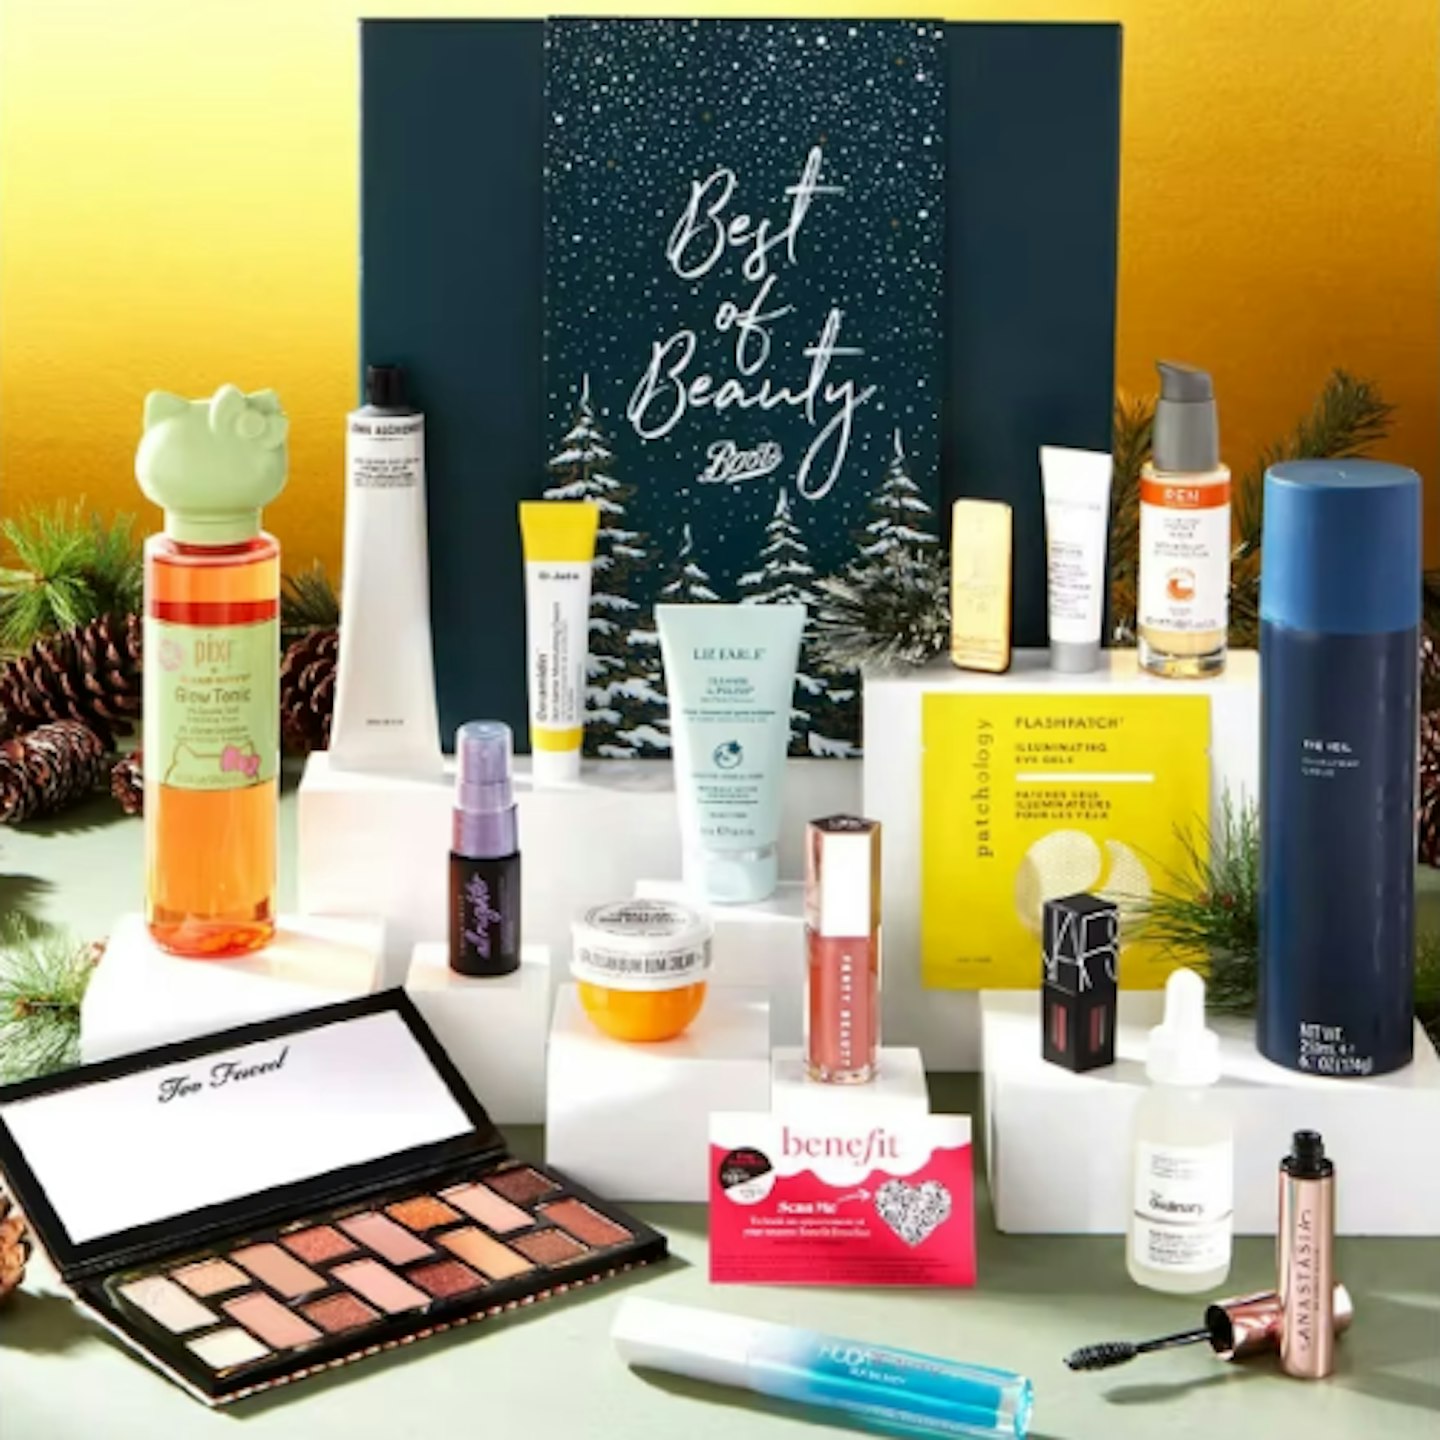 STAR GIFT Boots Best of Beauty Christmas Showstopper Beauty Box - Limited Edition